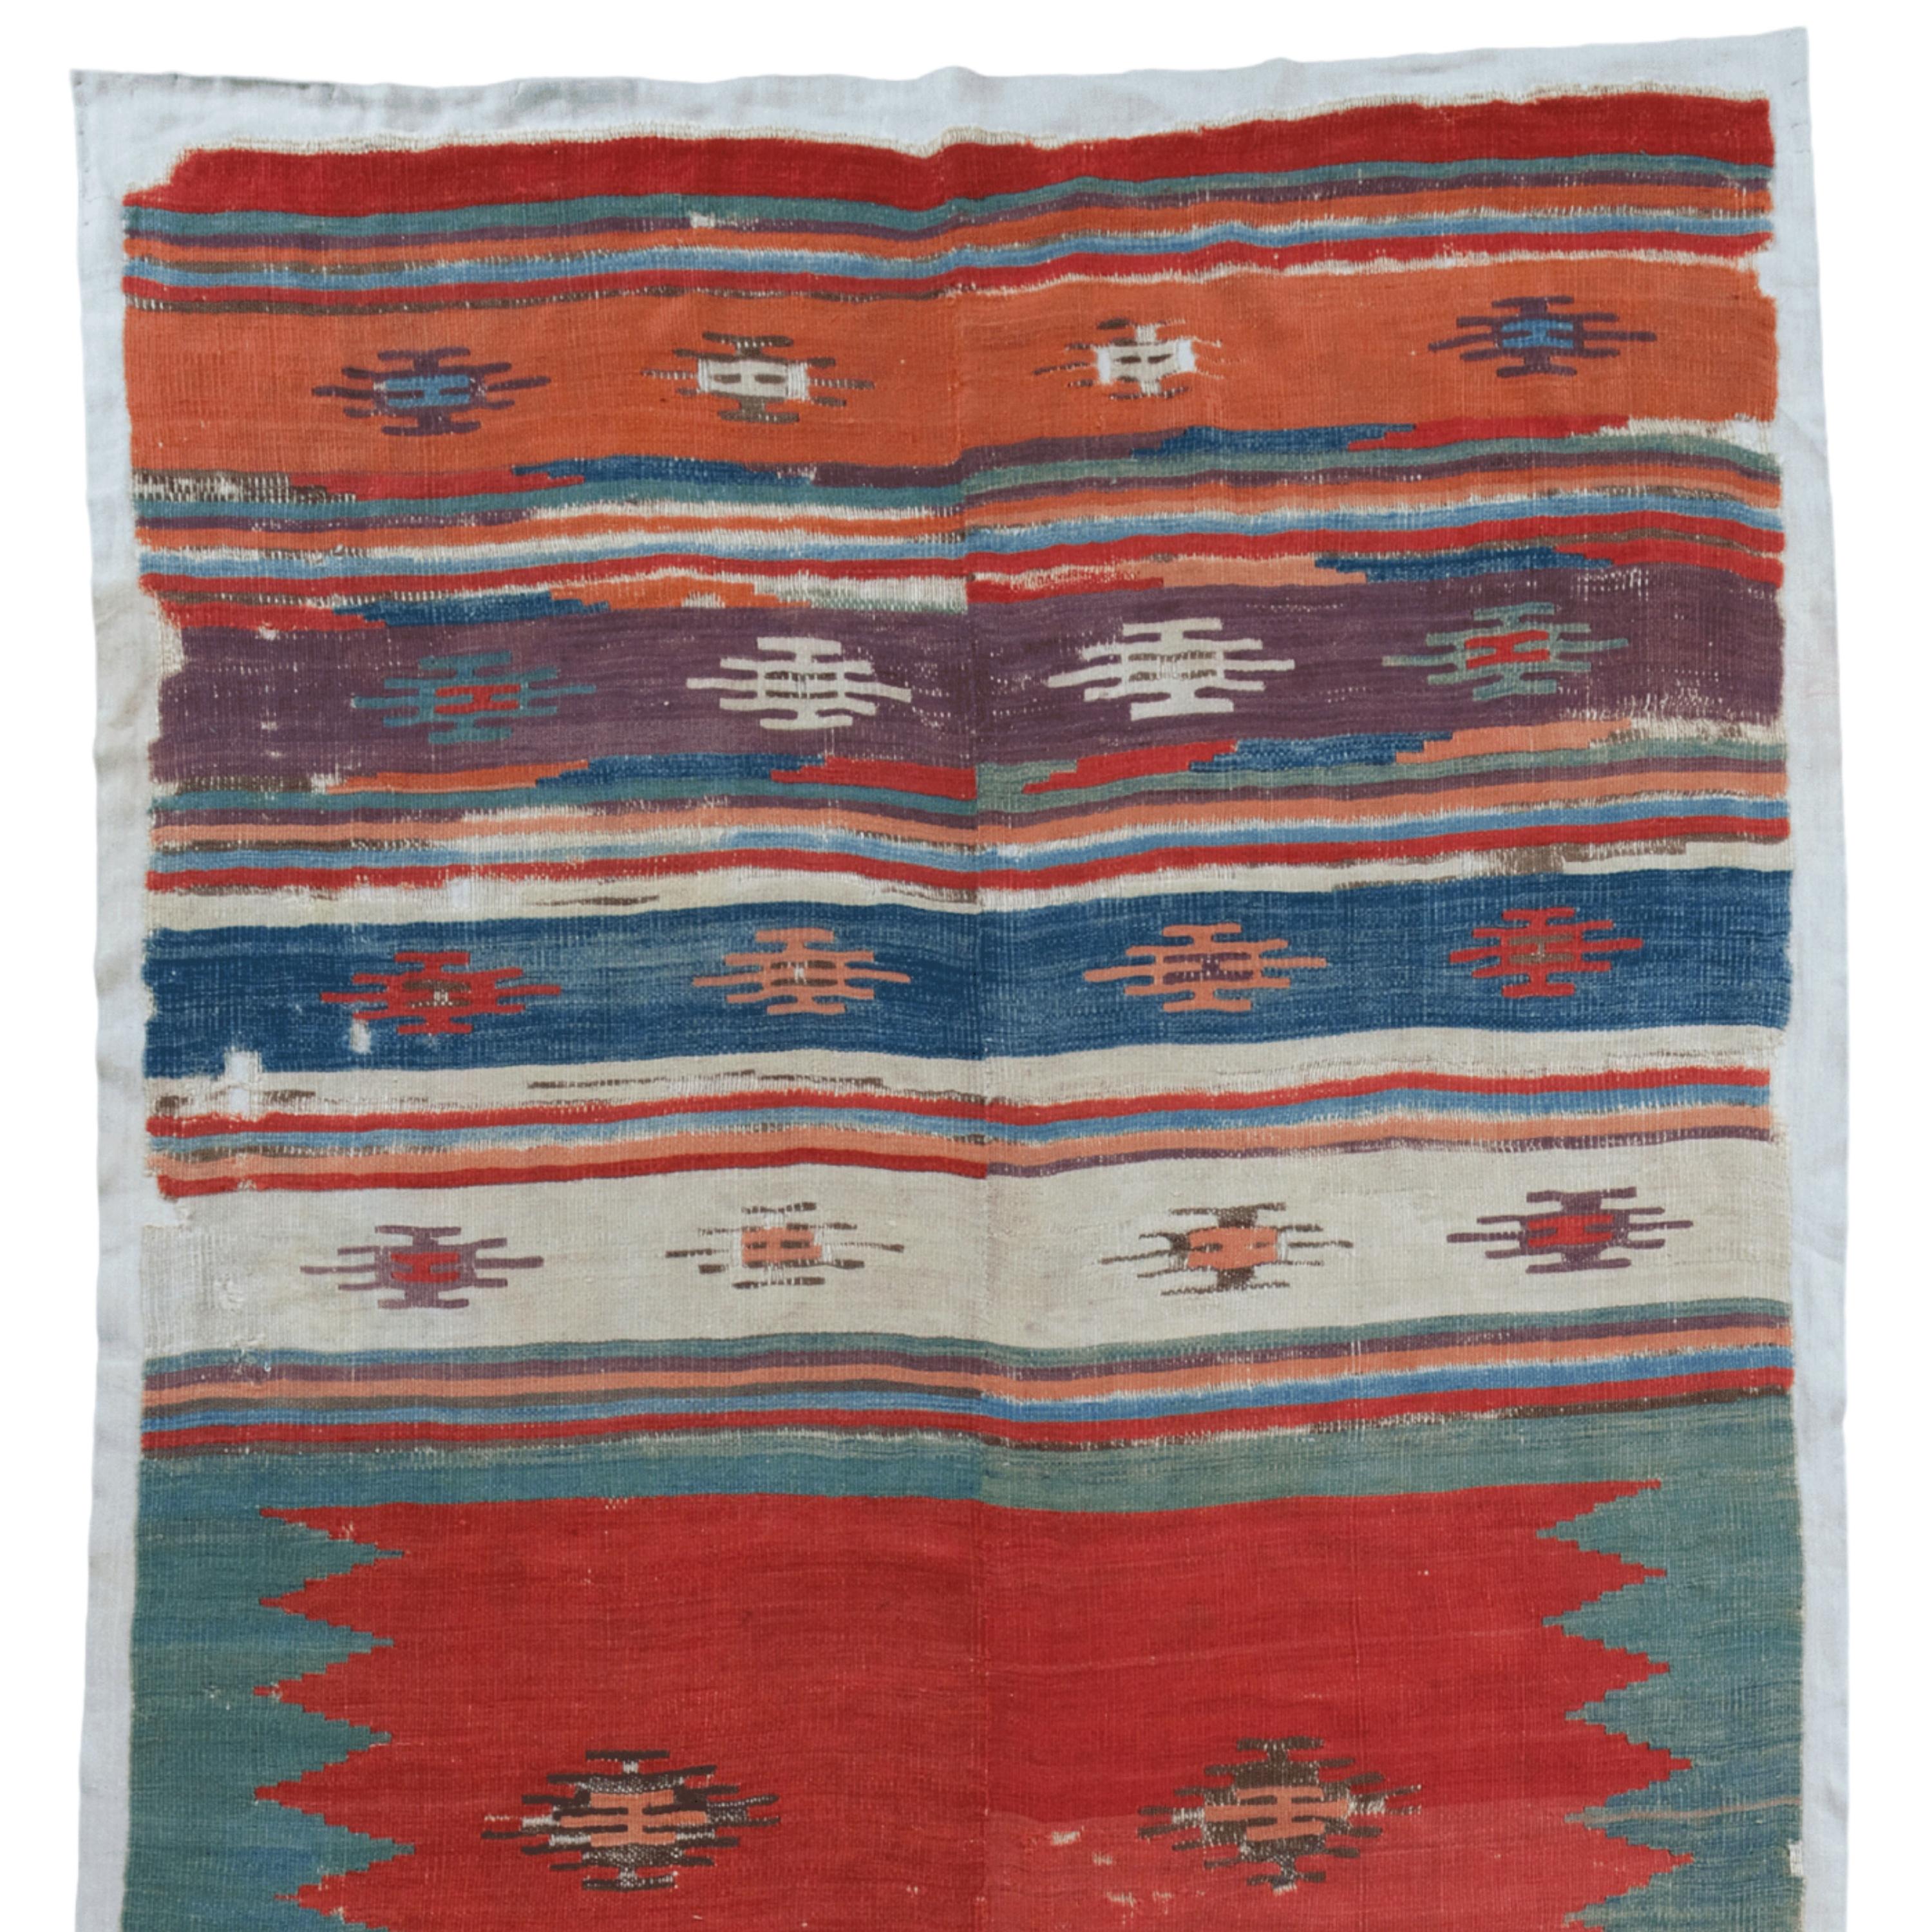 This 18th-century antique Sivas rug features a series of horizontal bands decorated with traditional motifs. A vibrant red central area is surrounded by bands of blue, white and earth tones. Each band contains geometric patterns and stylized floral